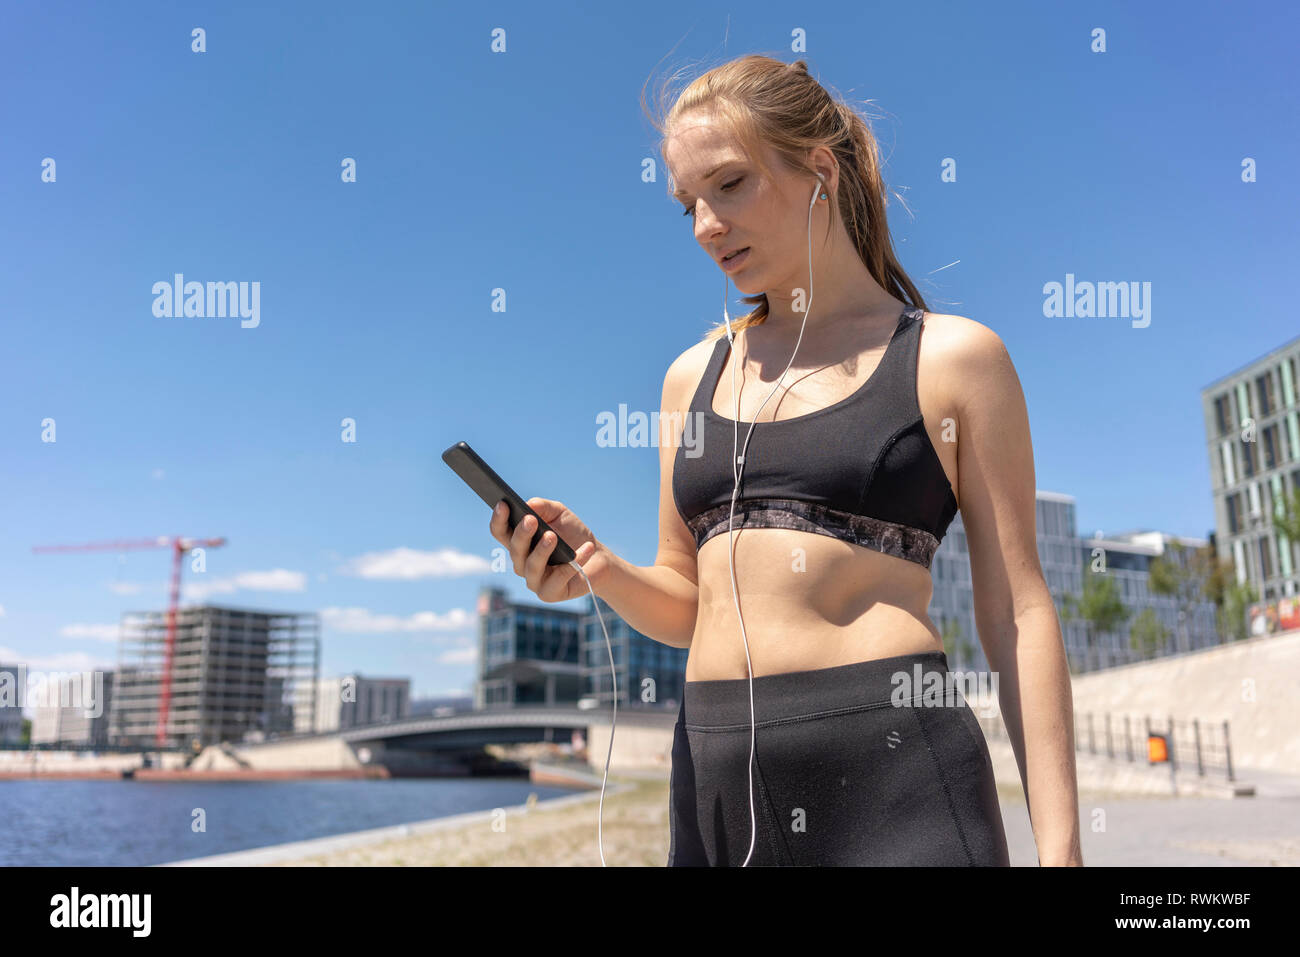 Young woman taking break from exercise and using smartphone in city, Berlin, Germany Stock Photo